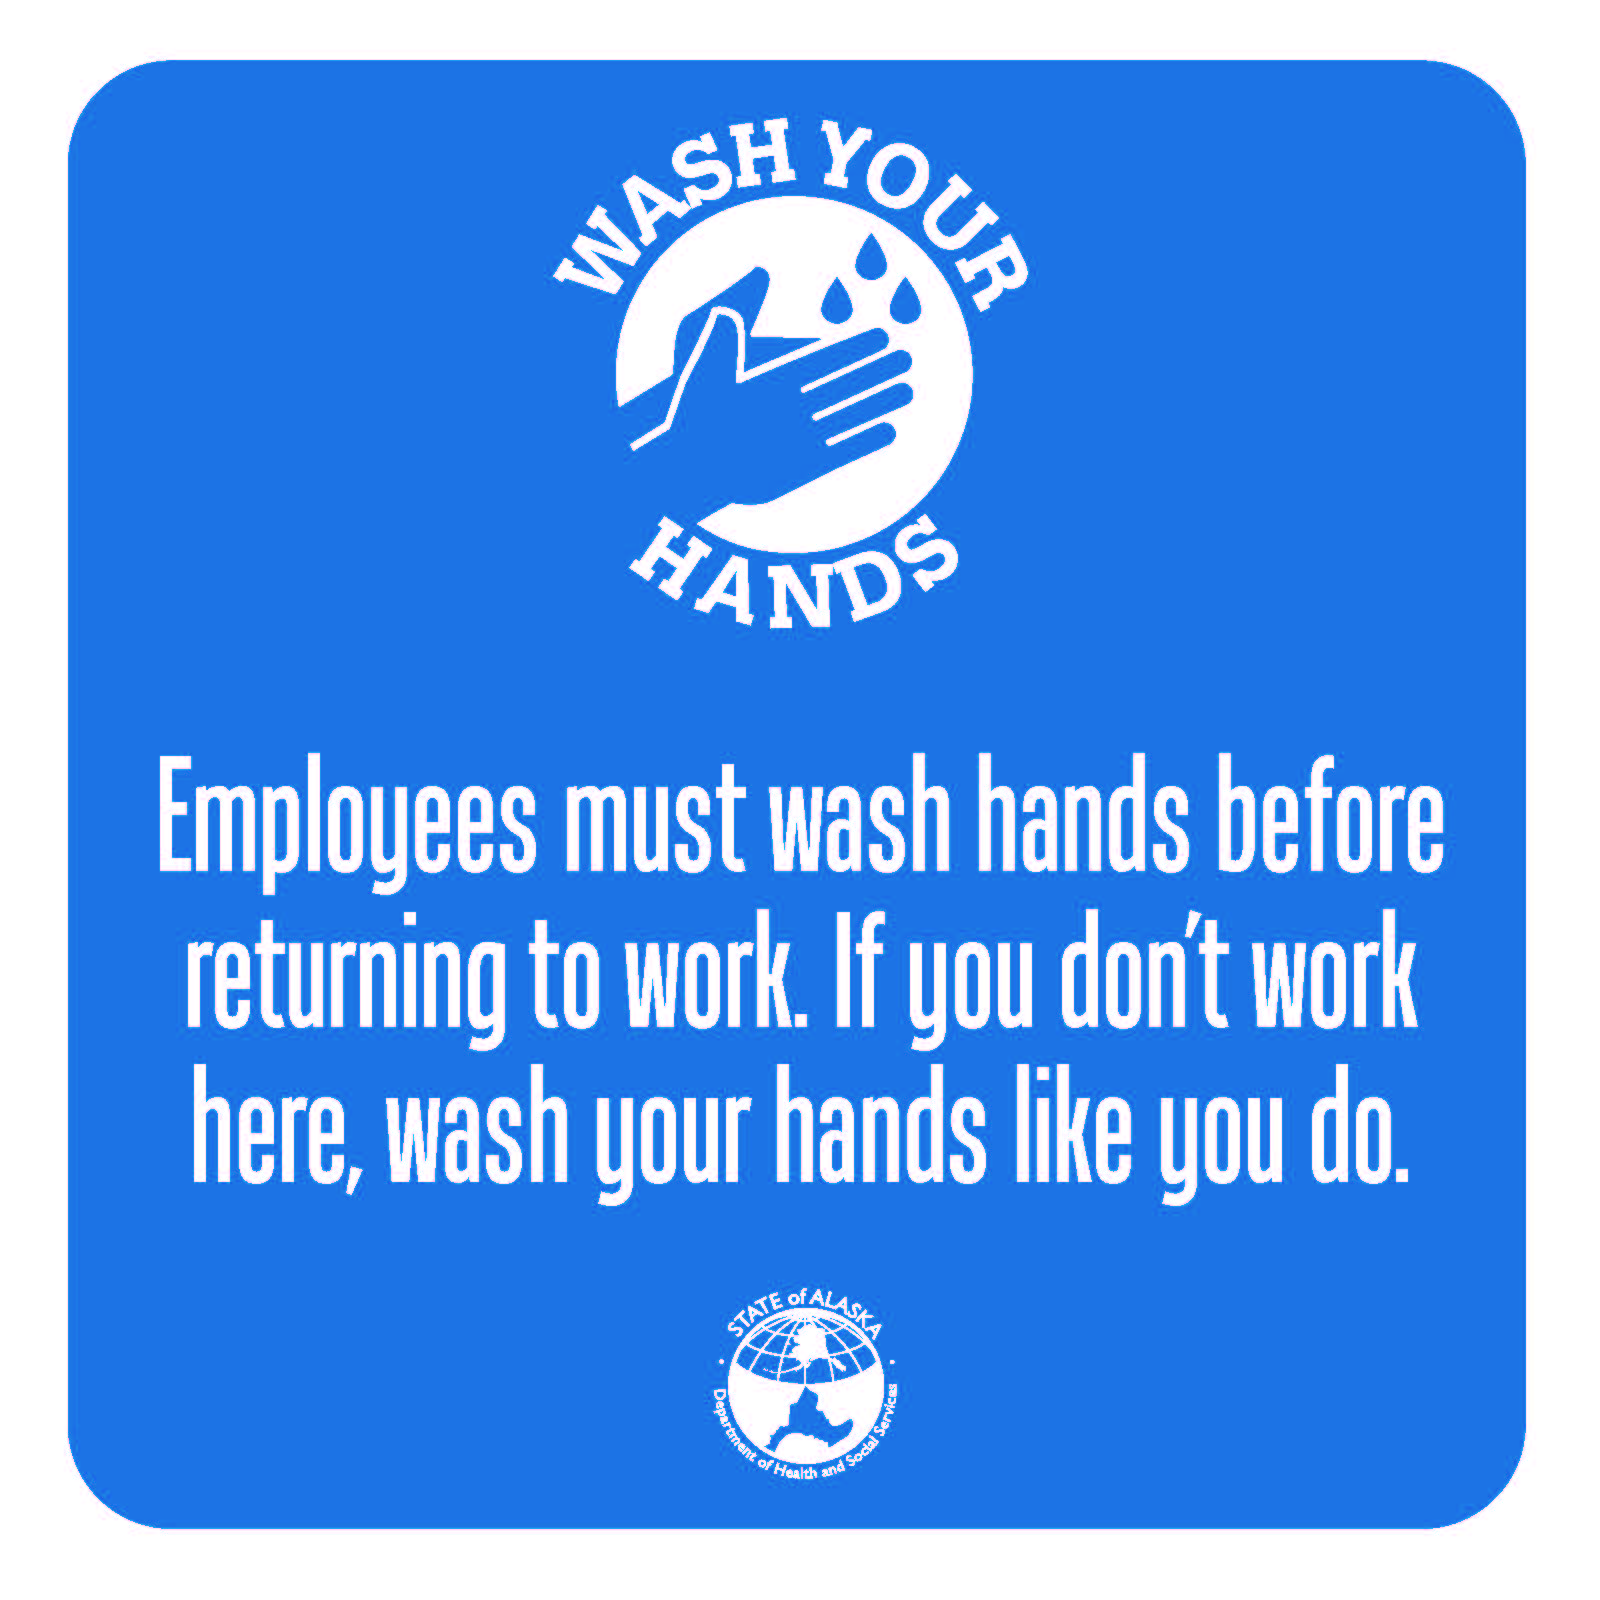 Wash your hands: Employees must wash their hands before returning to work. If you don't work here, wash your hands like you do.